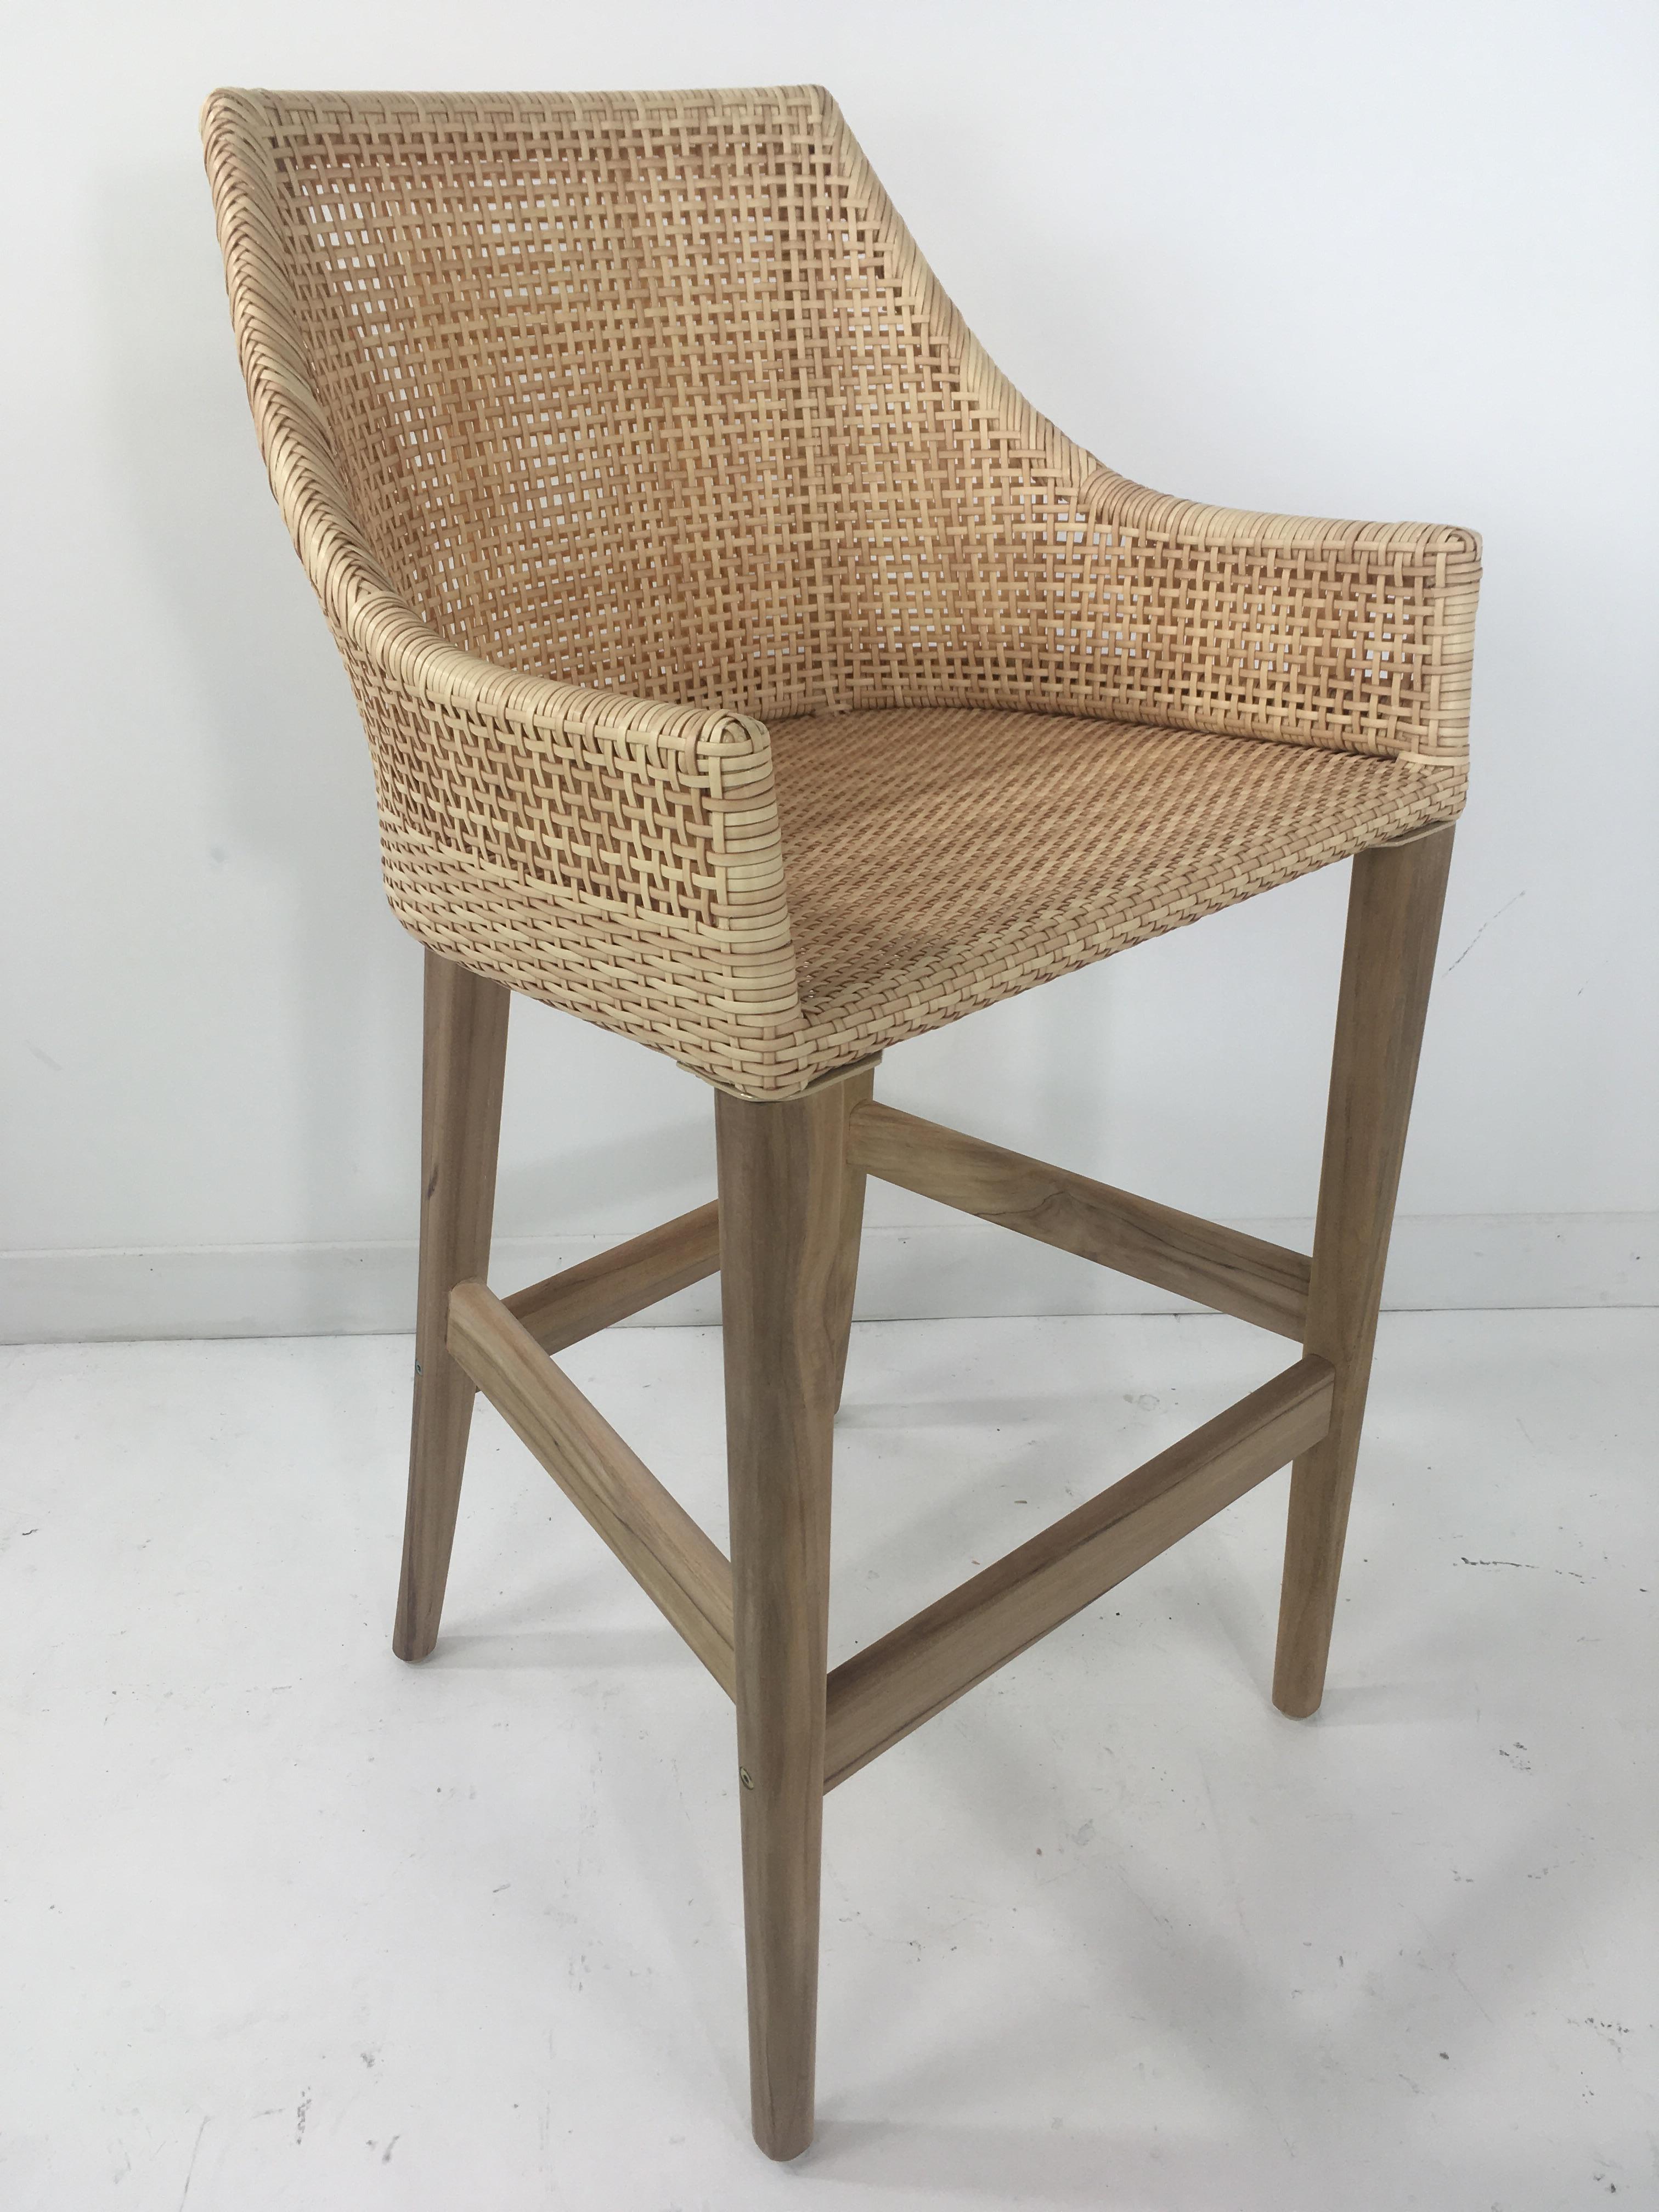 Teak Wooden and Braided Resin Rattan Effect Outdoor Bar Stool For Sale 1